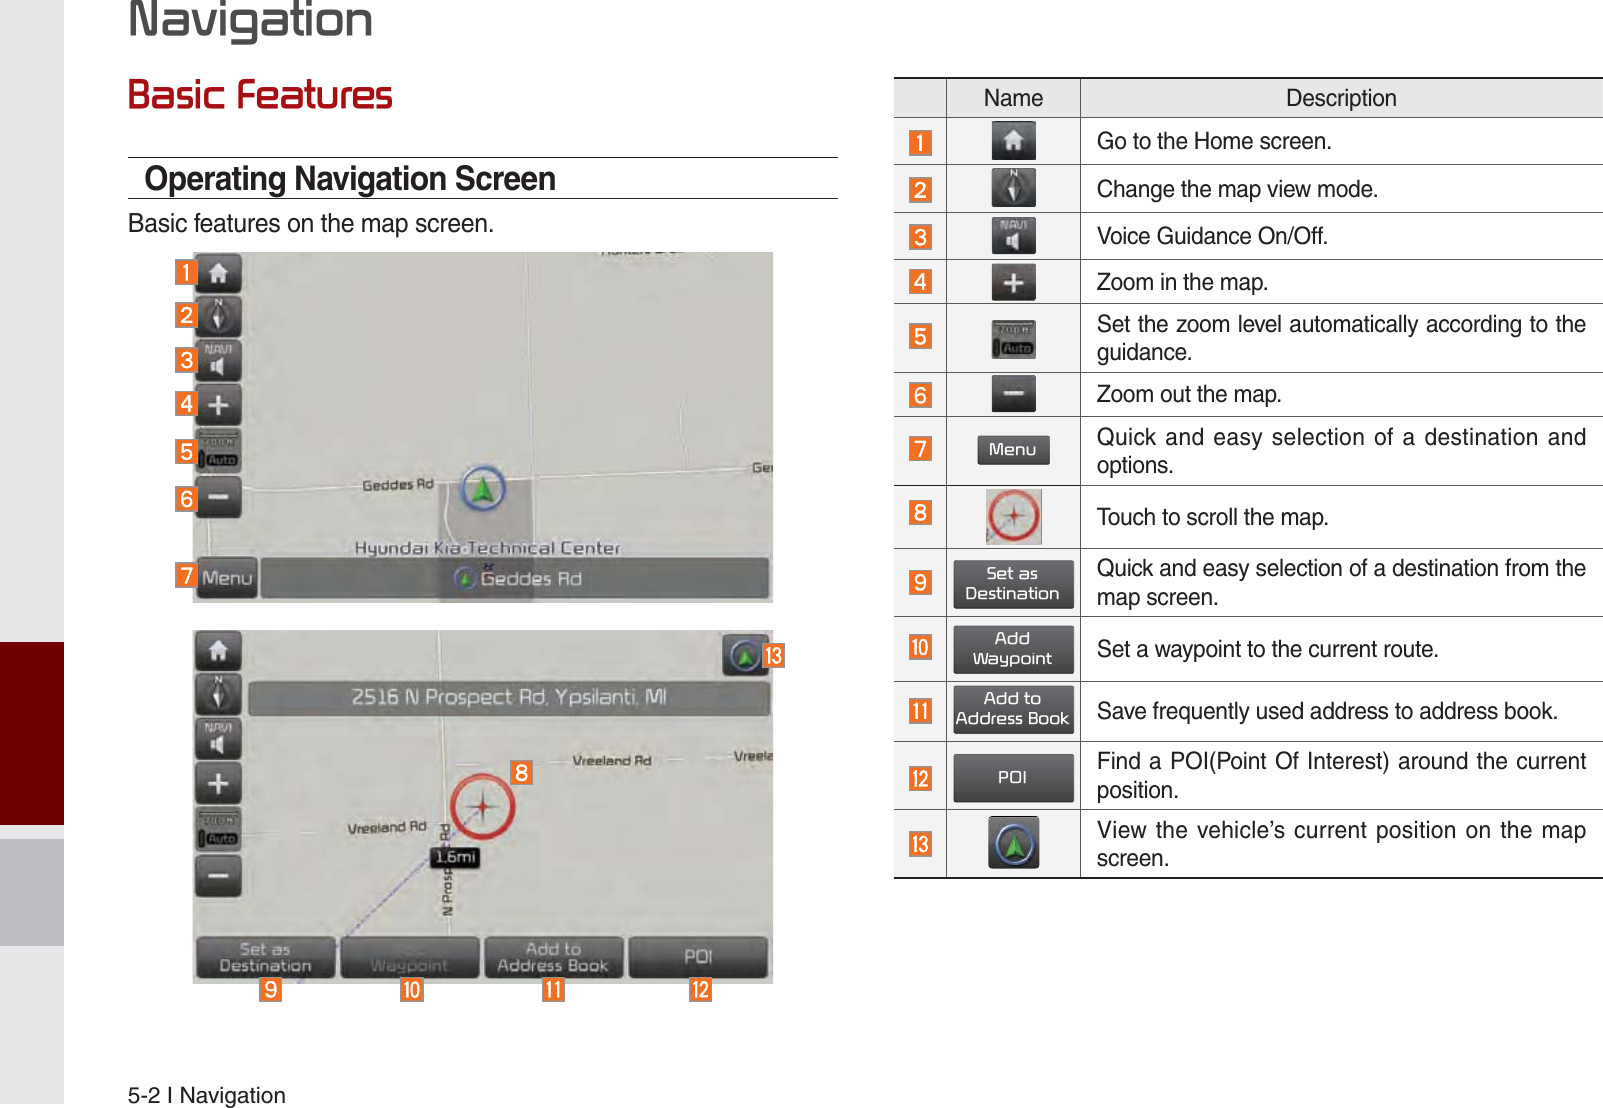 5-2 I Navigation1DYLJDWLRQ%DVLF)HDWXUHVOperating Navigation ScreenBasic features on the map screen. Name DescriptionGo to the Home screen.Change the map view mode. Voice Guidance On/Off.Zoom in the map.Set the zoom level automatically according to the guidance.Zoom out the map.0HQXQuick and easy selection of a destination and options.Touch to scroll the map.6HWDV&apos;HVWLQDWLRQQuick and easy selection of a destination from the map screen.$GG:D\SRLQWSet a waypoint to the current route.$GGWR$GGUHVV%RRNSave frequently used address to address book.32,Find a POI(Point Of Interest) around the current position.View the vehicle’s current position on the map screen.K_UM_G4.0[EN]AVN PART 5.indd   5-2 2014-10-02   오전 9:21:06